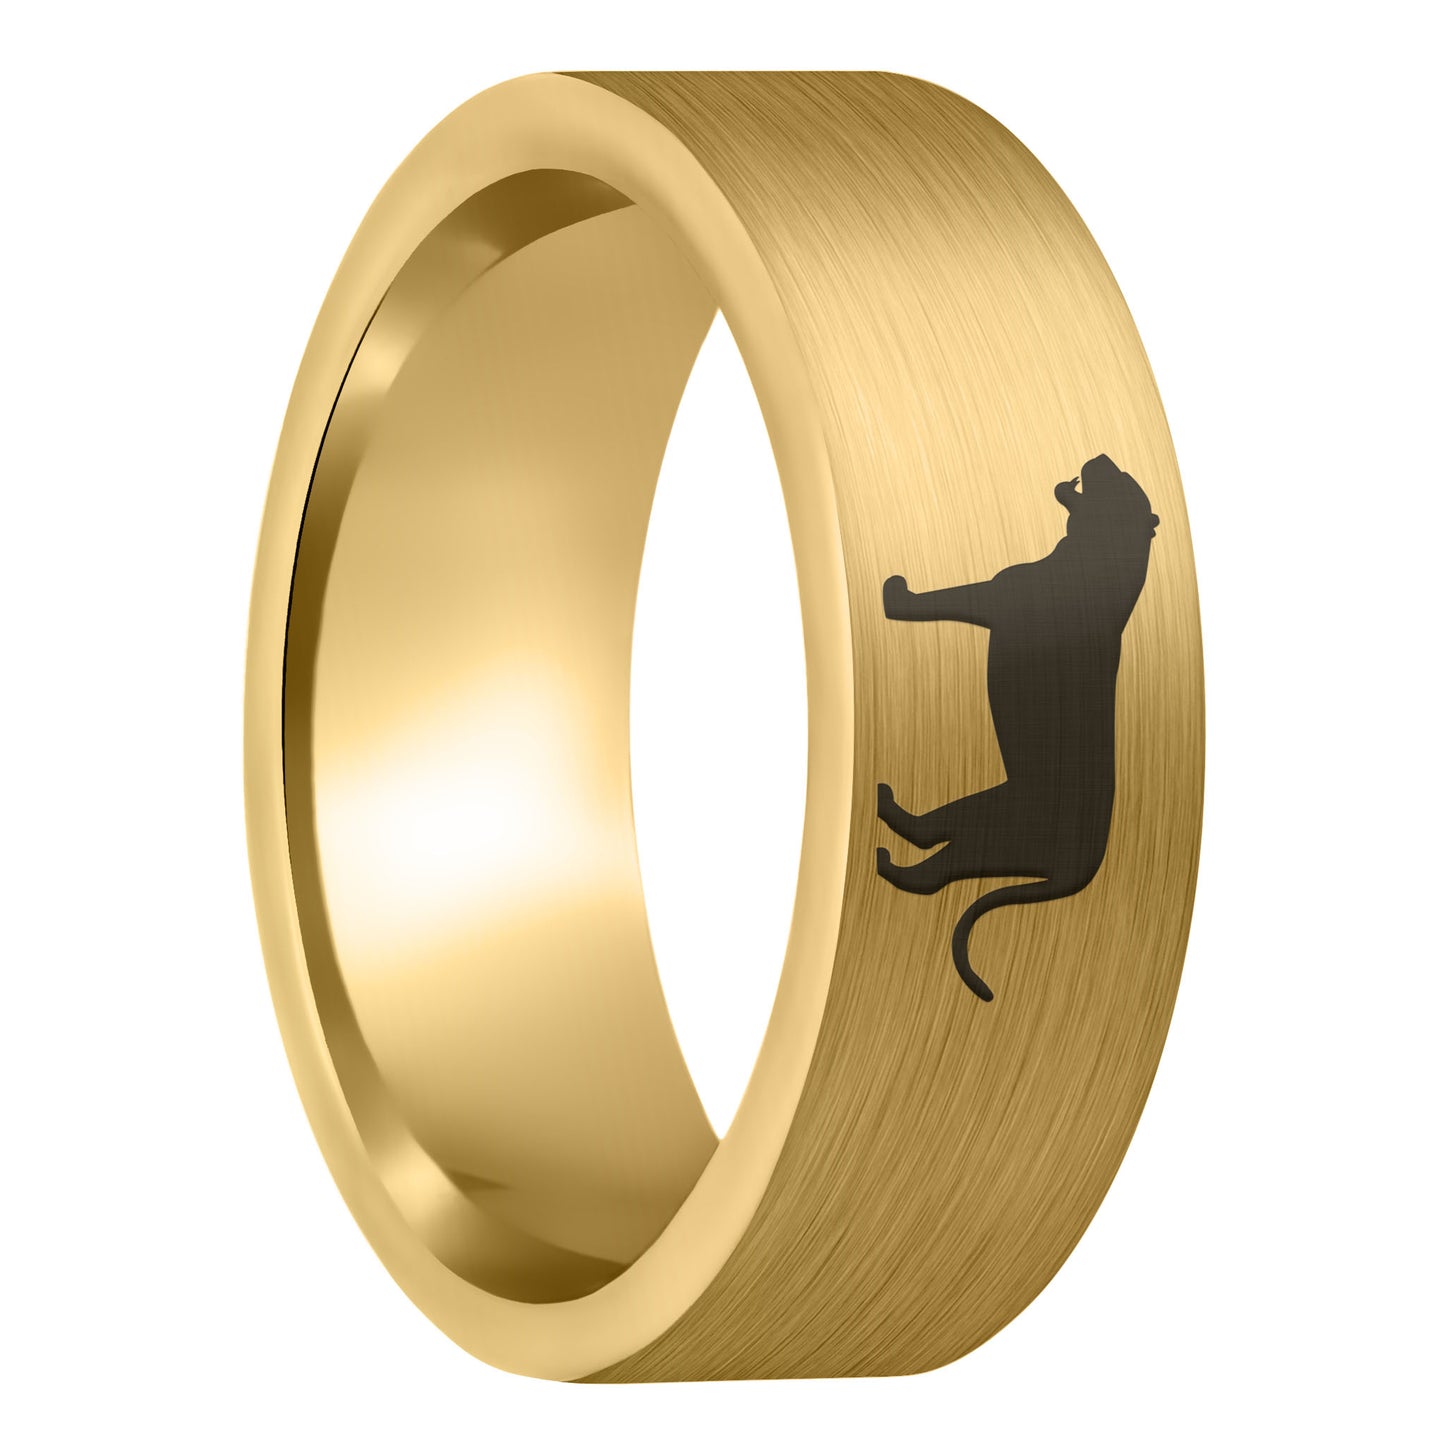 A tiger brushed gold tungsten men's wedding band displayed on a plain white background.